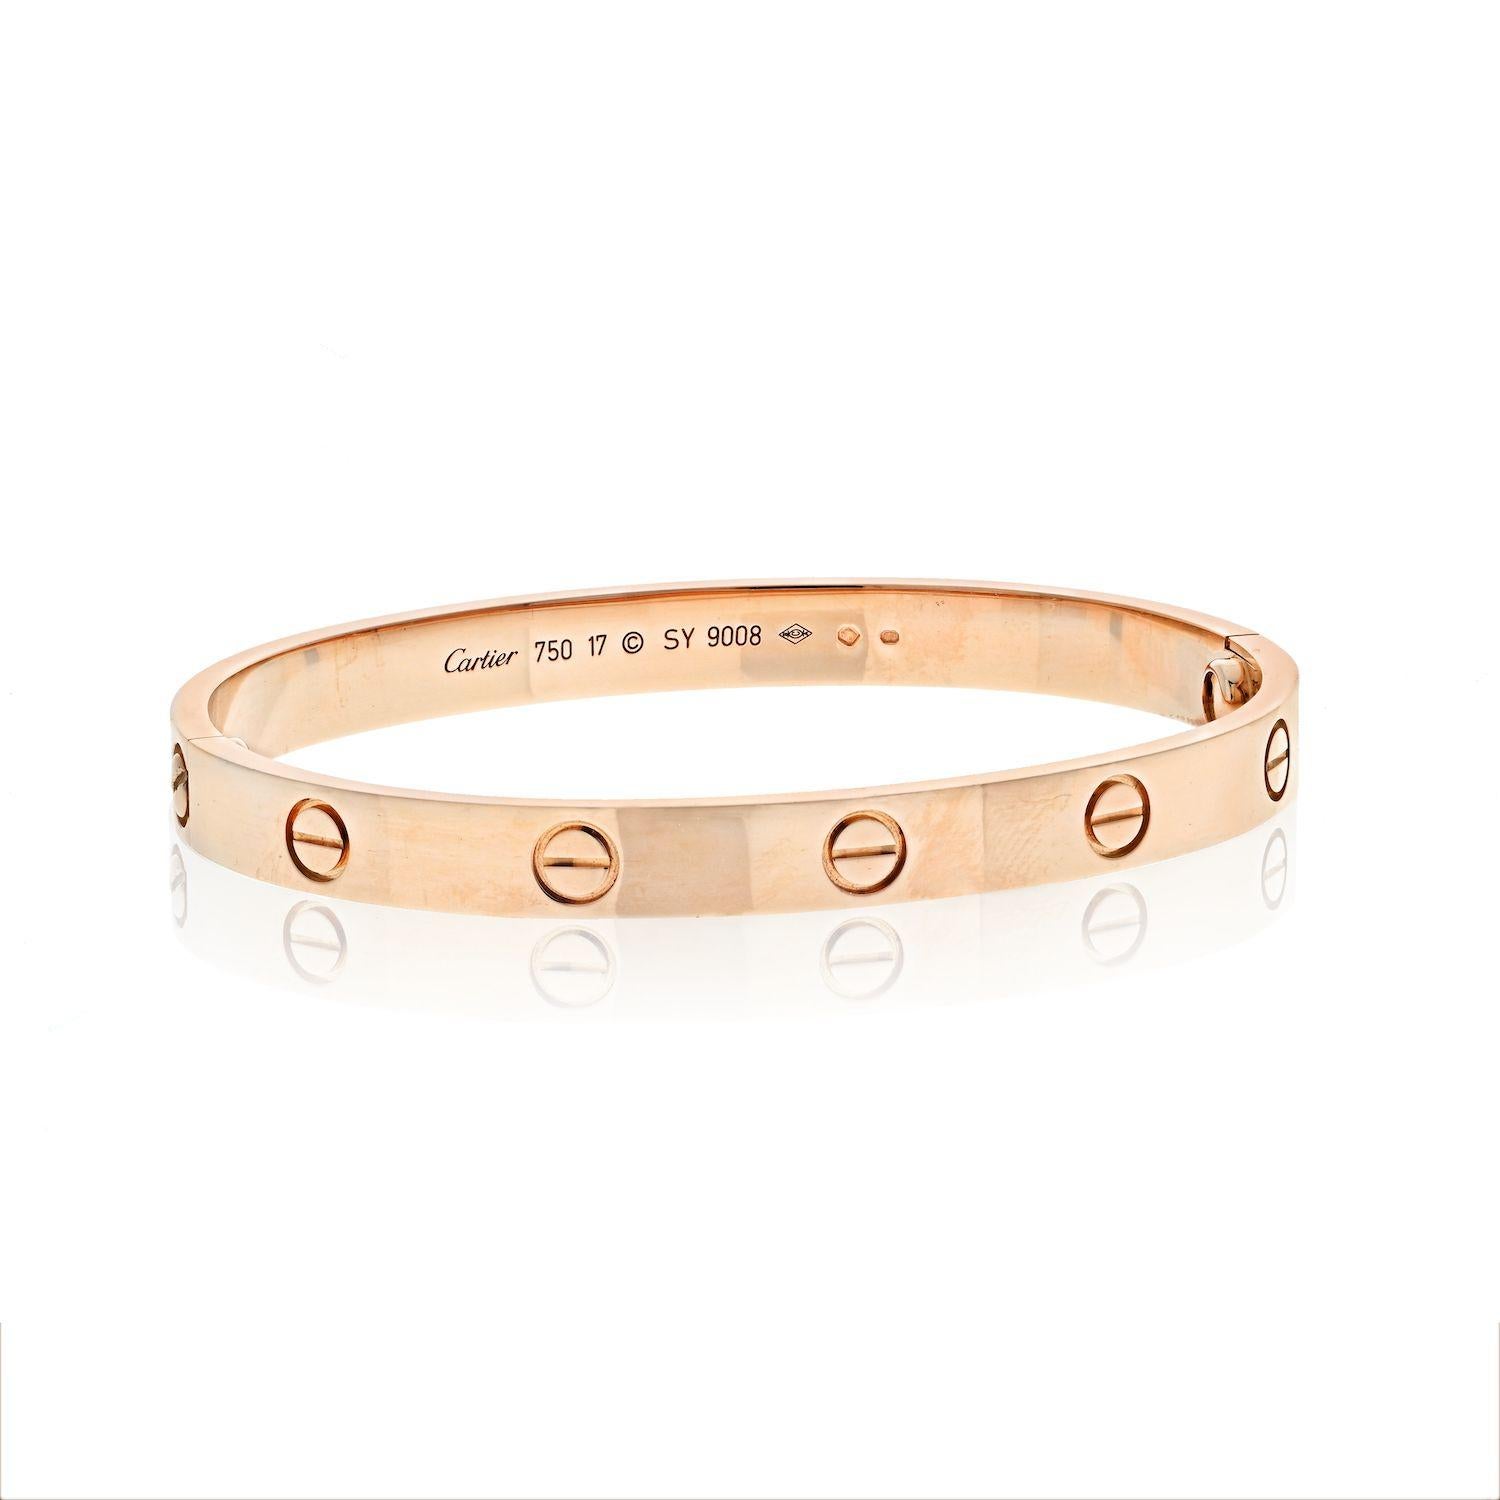 We all love Cartier. This is the most famous bracelet of all times: The Love Bracelet by Cartier. 
Size: 17
Material: Rose Gold (Pink Gold) 

New style screw system. 